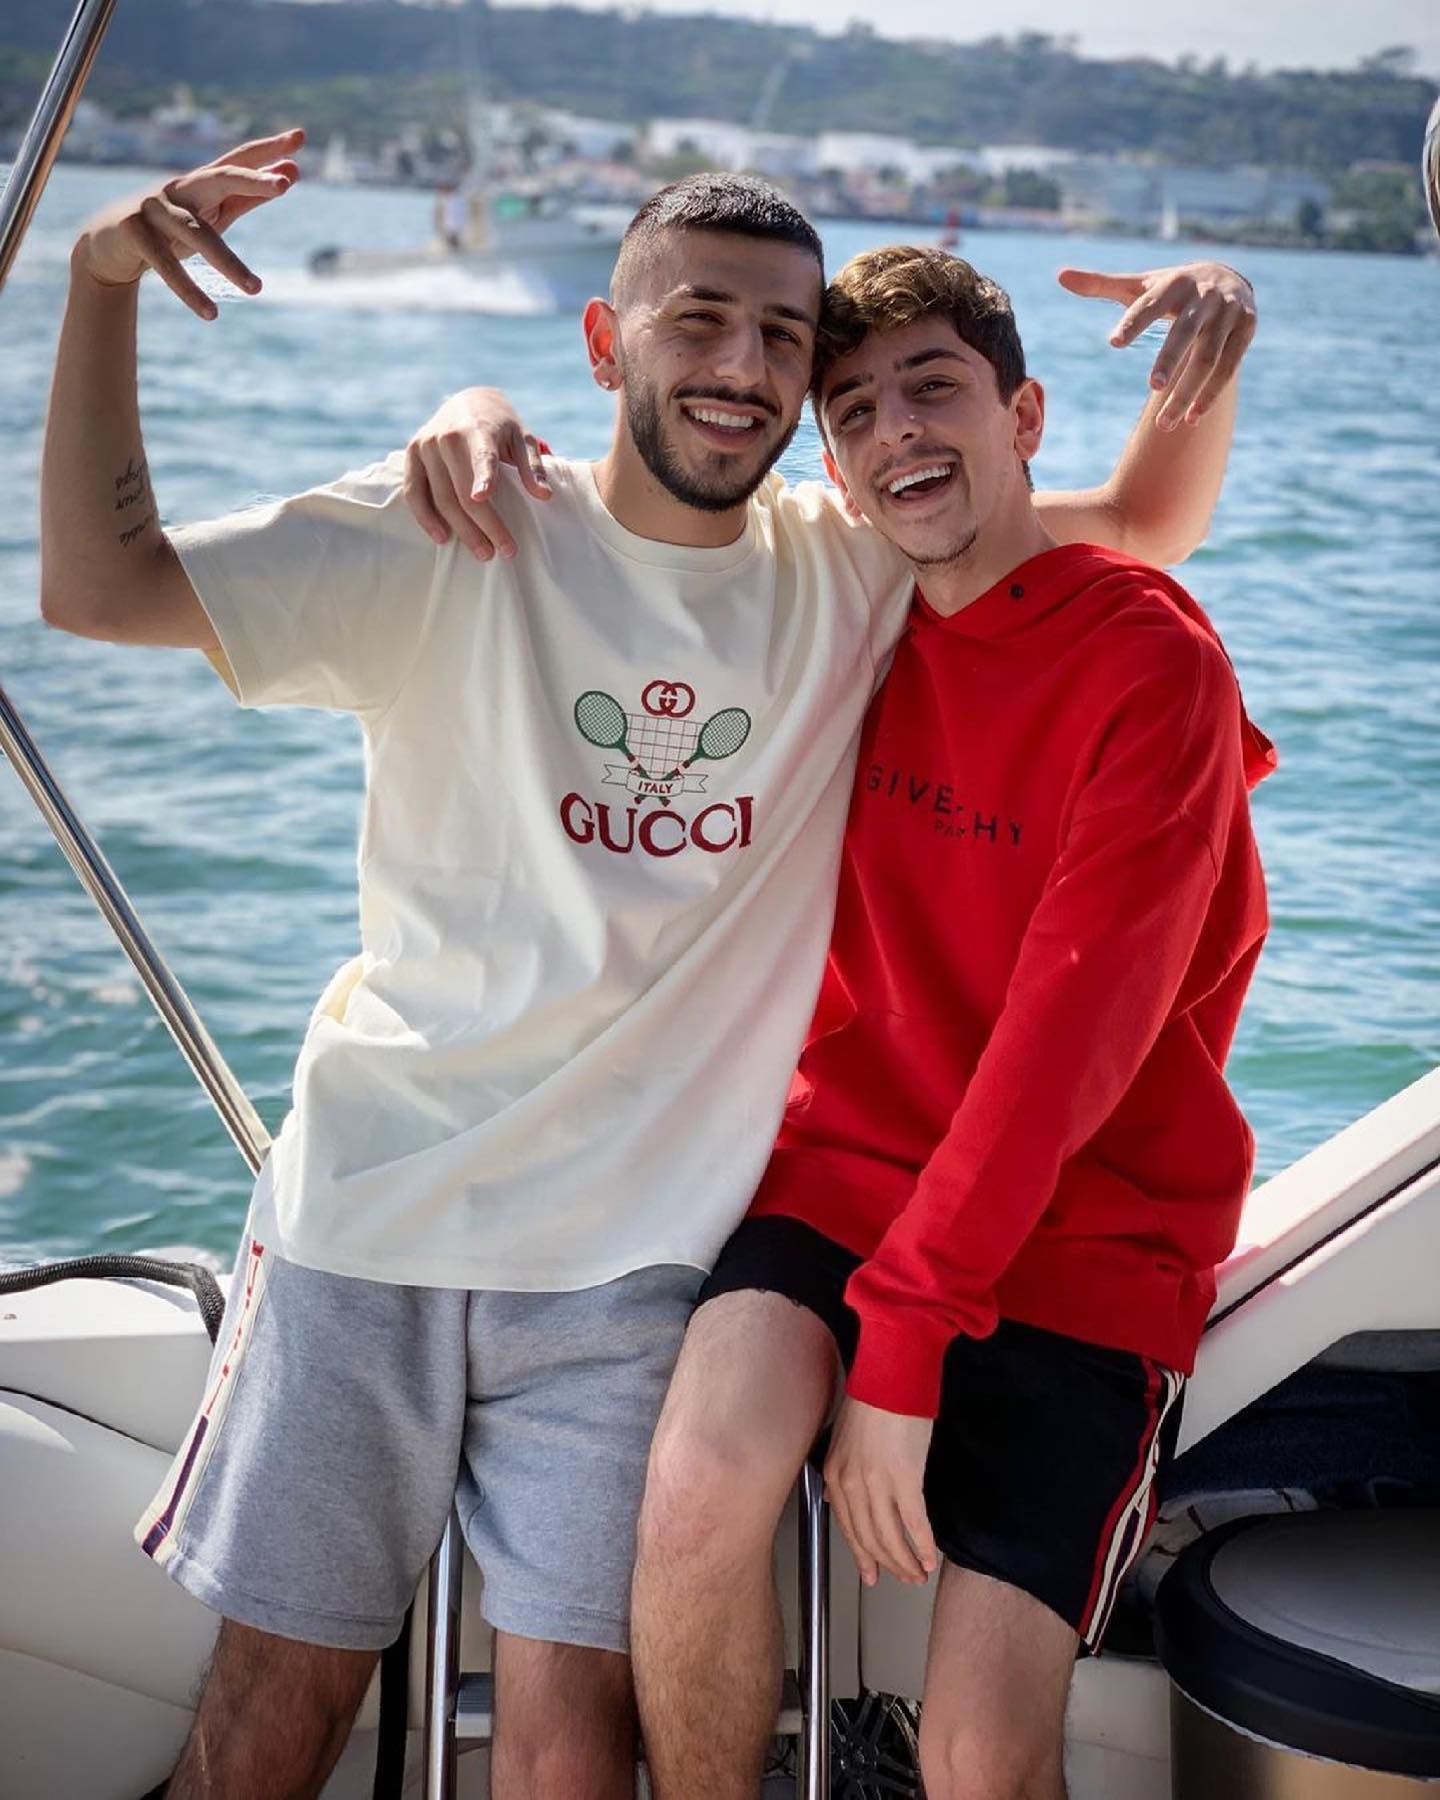 FaZe Rug with his brother